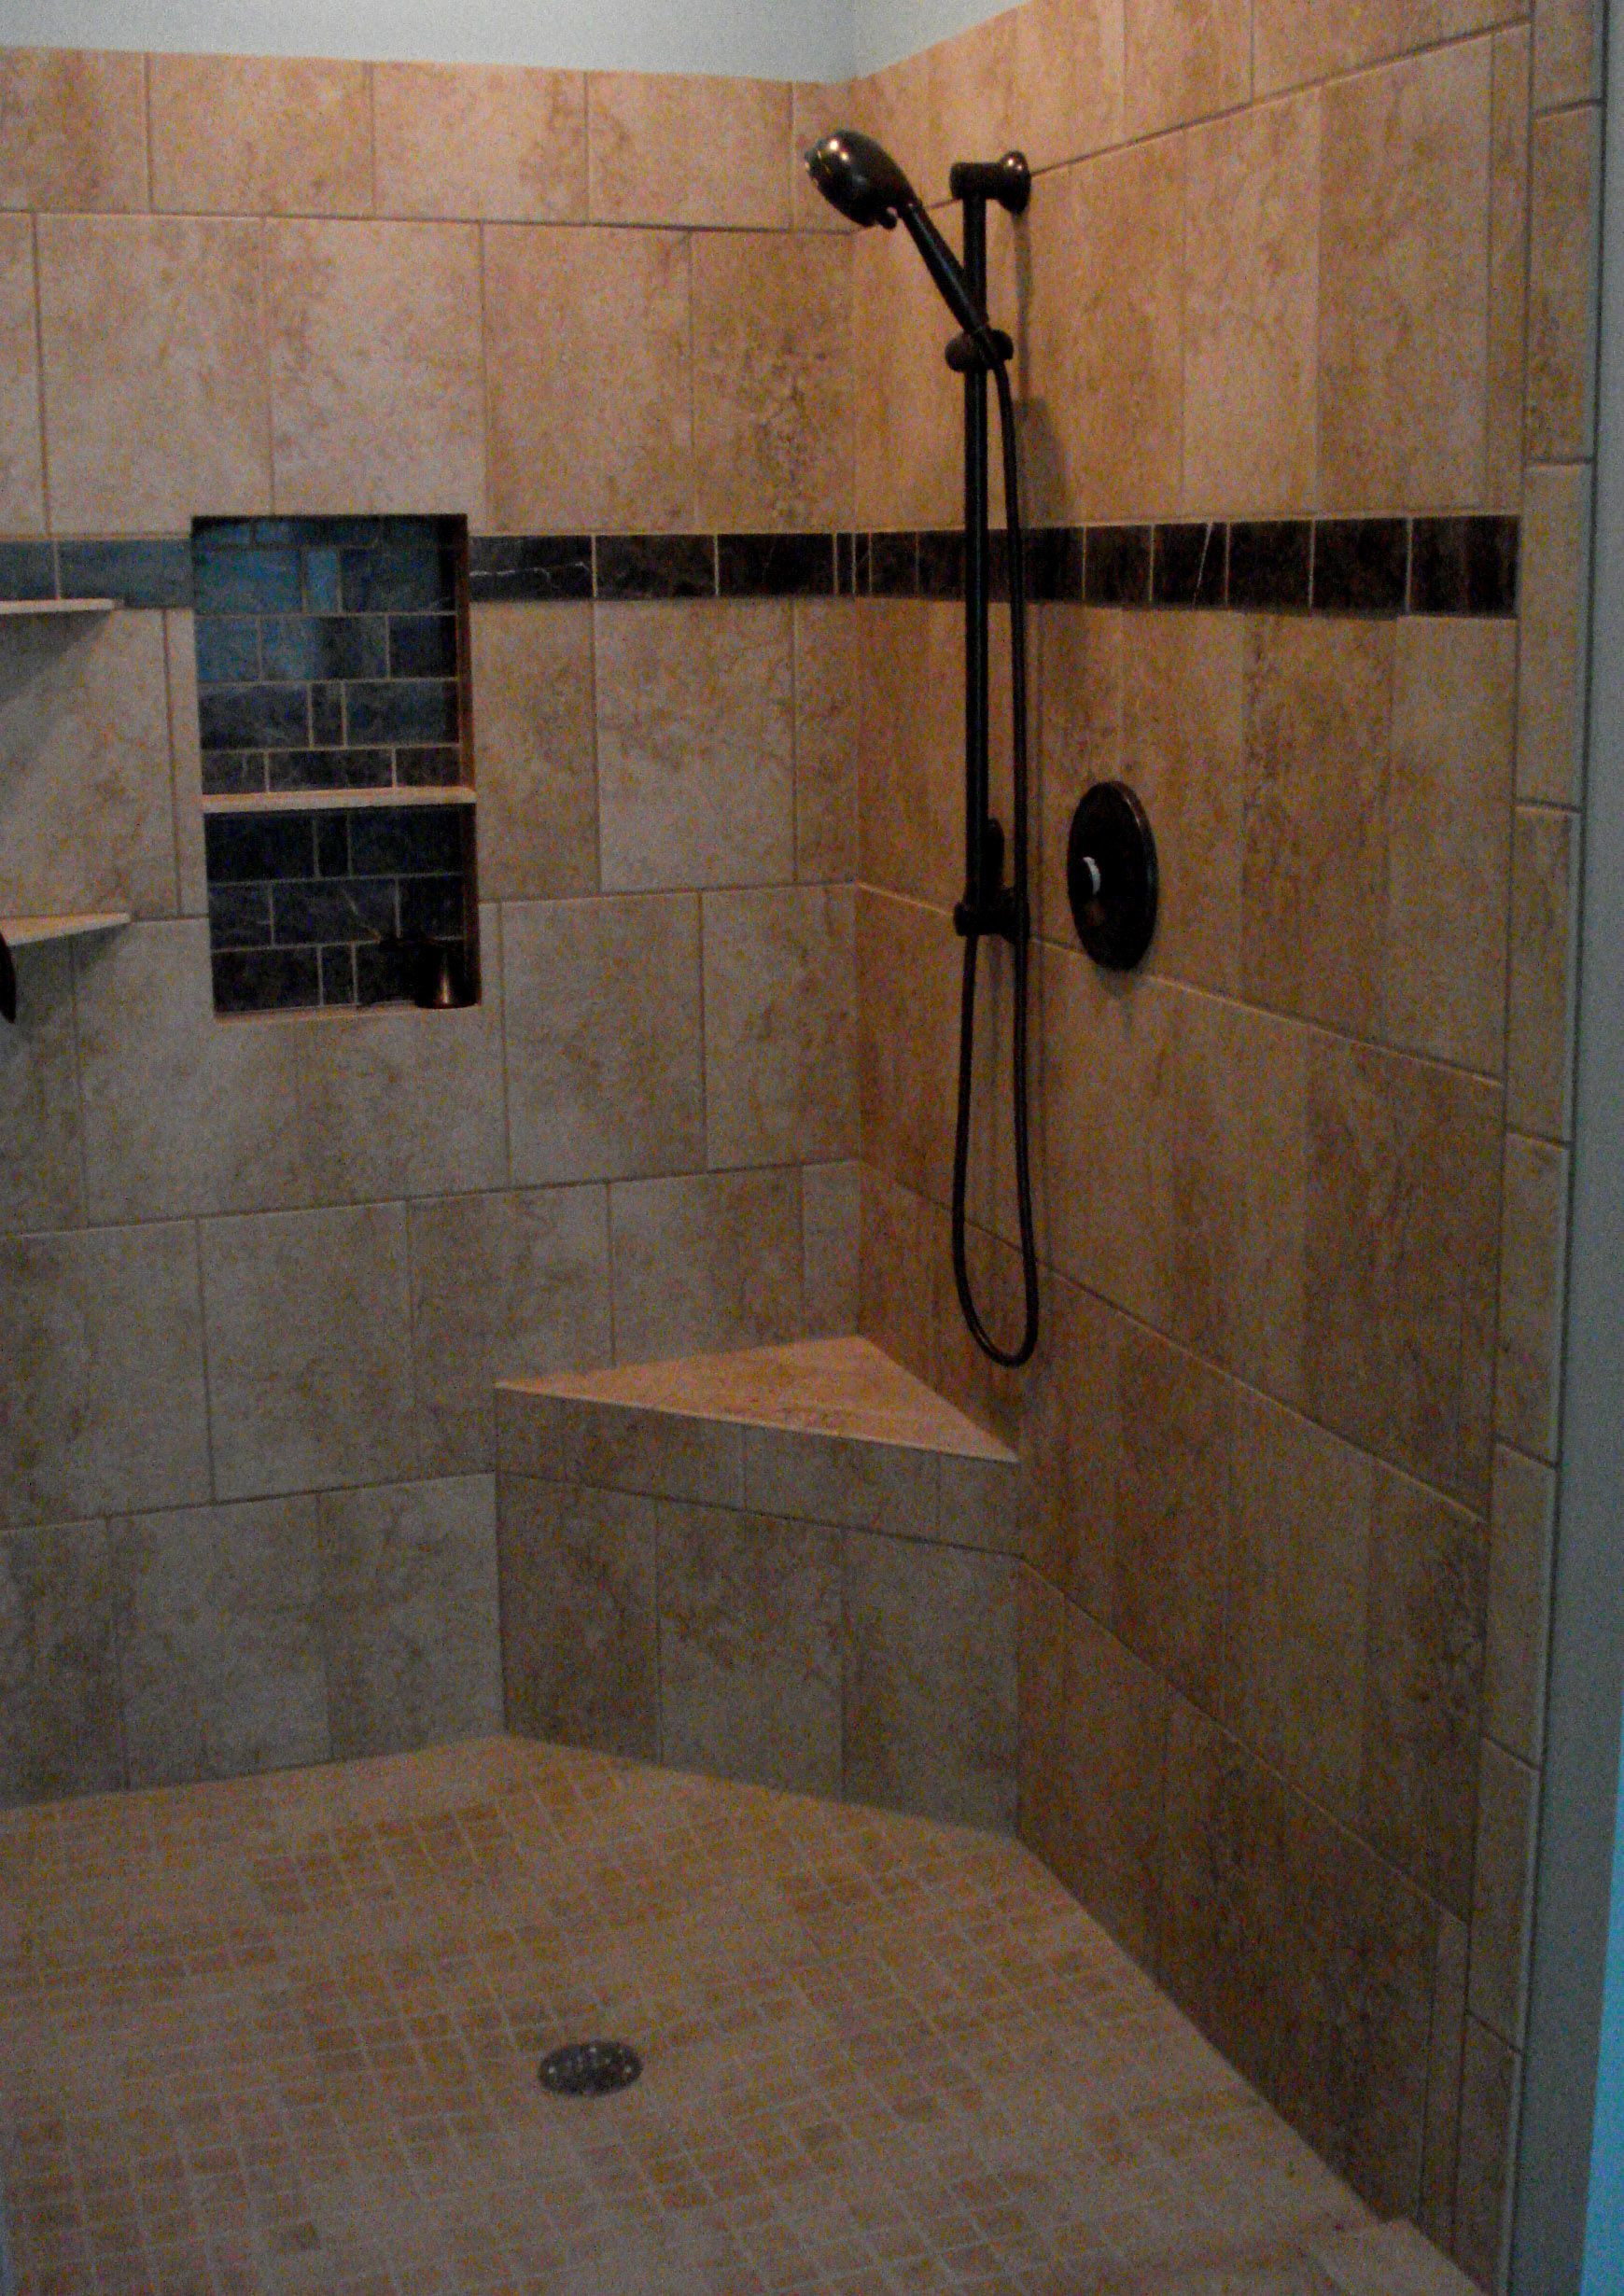 Bathroom Shower Tile Ideas
 Tile Shower Ideas Affecting the Appearance of the Space